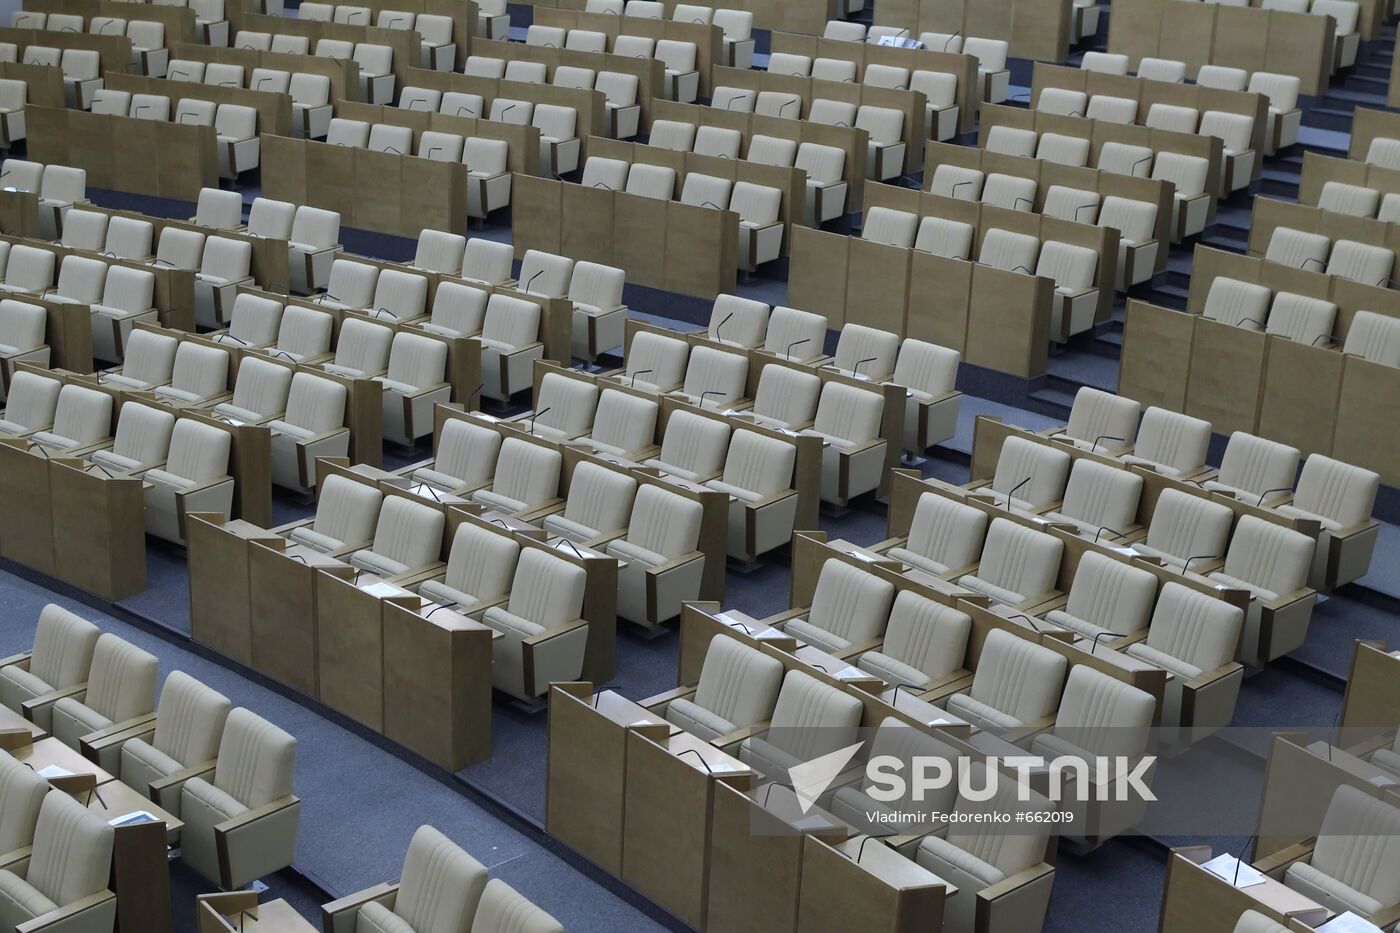 State Duma's conference hall